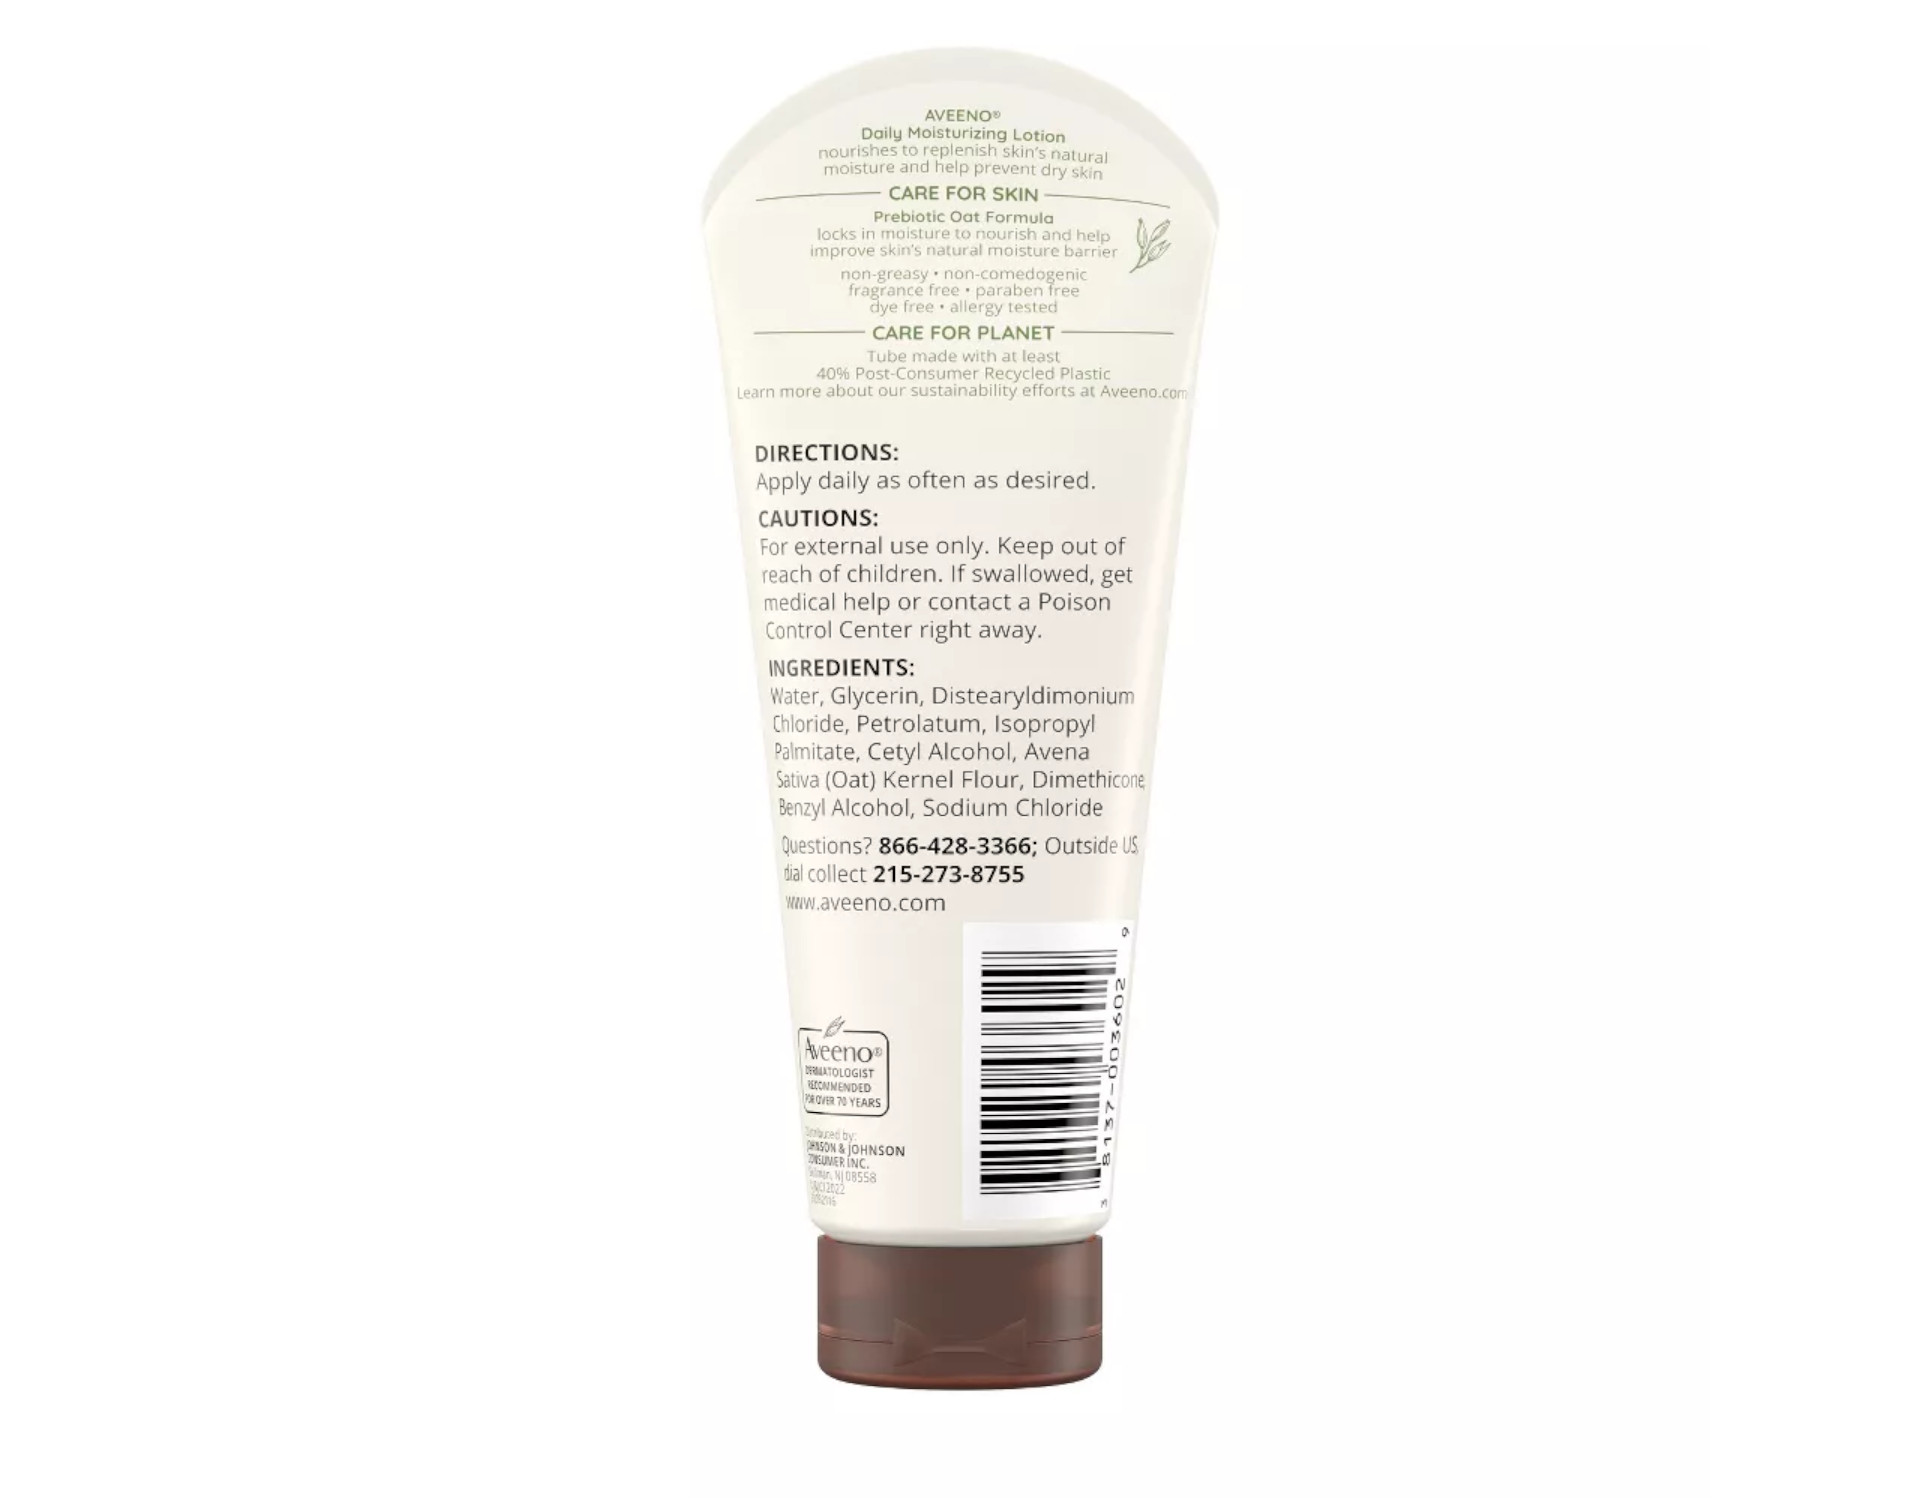 AVEENO Active Naturals Daily Moisturizing Lotion 2.50 oz (Pack of 4) - image 5 of 8